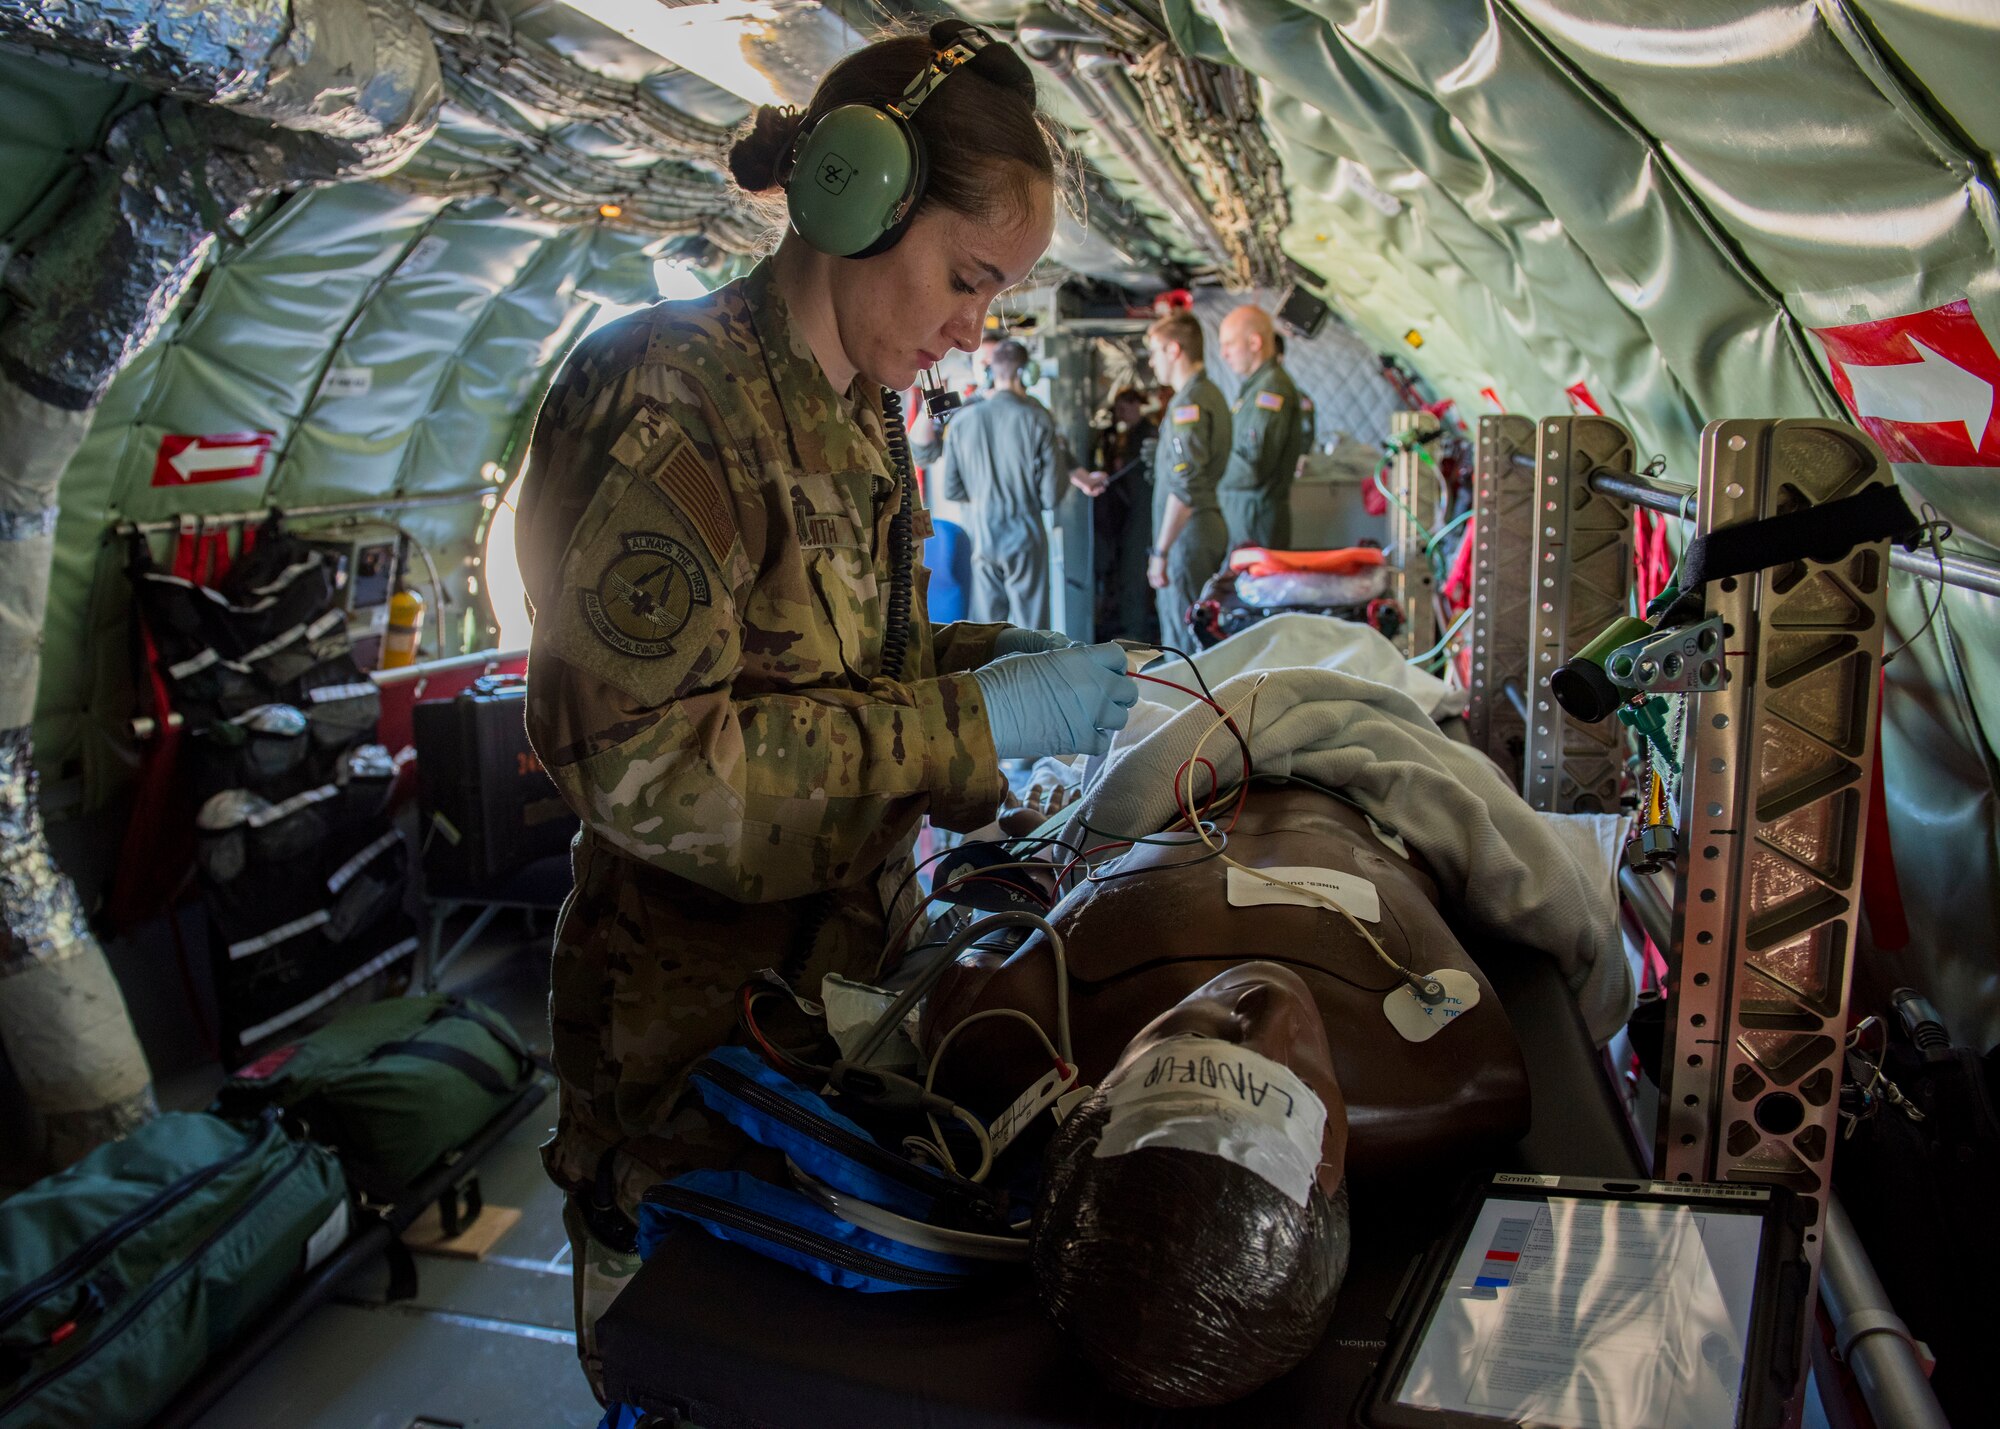 U.S. Air Force 1st Lt. Elayne Smith, 43rd Aeromedical Evacuation Squadron flight nurse, places electrocardiogram leads onto a training mannequin during an aeromedical evacuation training mission at Travis Air Force Base, California, Feb. 11, 2020. The 43rd AES is currently transitioning from its present station at Pope Army Airfield, North Carolina, to become part of the 60th AES at Travis Air Force Base, California, providing more training opportunities on the KC-10 Extender, C-5 Super Galaxy and C-17 Globemaster III based there, as well as KC-135s based out of Fairchild. (U.S. Air Force photo by Senior Airman Lawrence Sena)